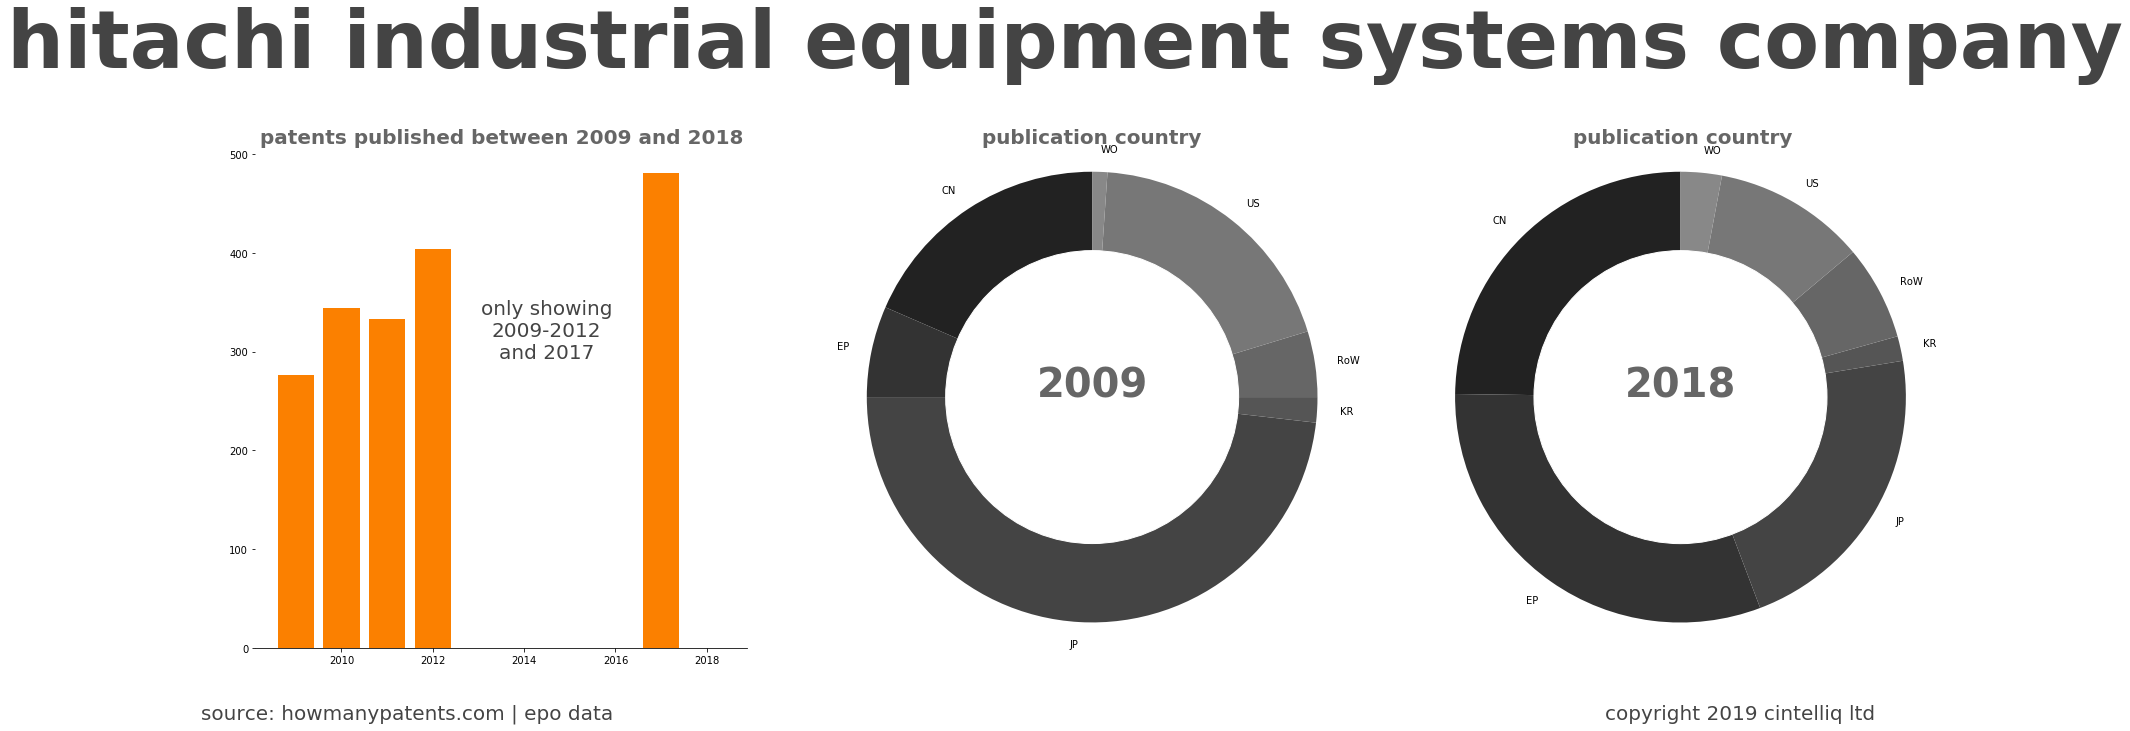 summary of patents for Hitachi Industrial Equipment Systems Company